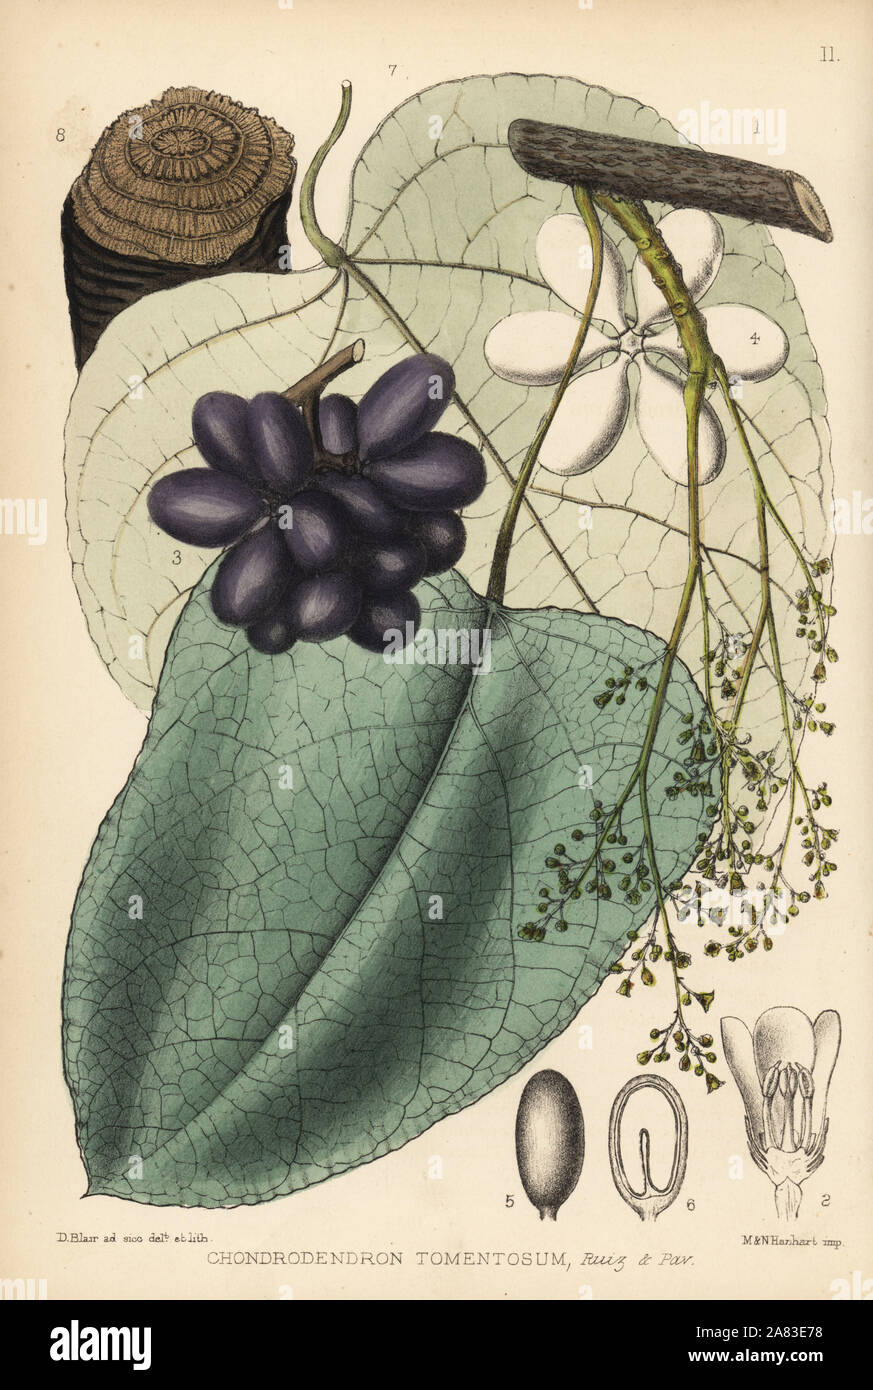 Curare, Parreira brava or abutua, Chondrodendron tomentosum. Handcoloured lithograph by Hanhart after a botanical illustration by David Blair from Robert Bentley and Henry Trimen's Medicinal Plants, London, 1880. Stock Photo